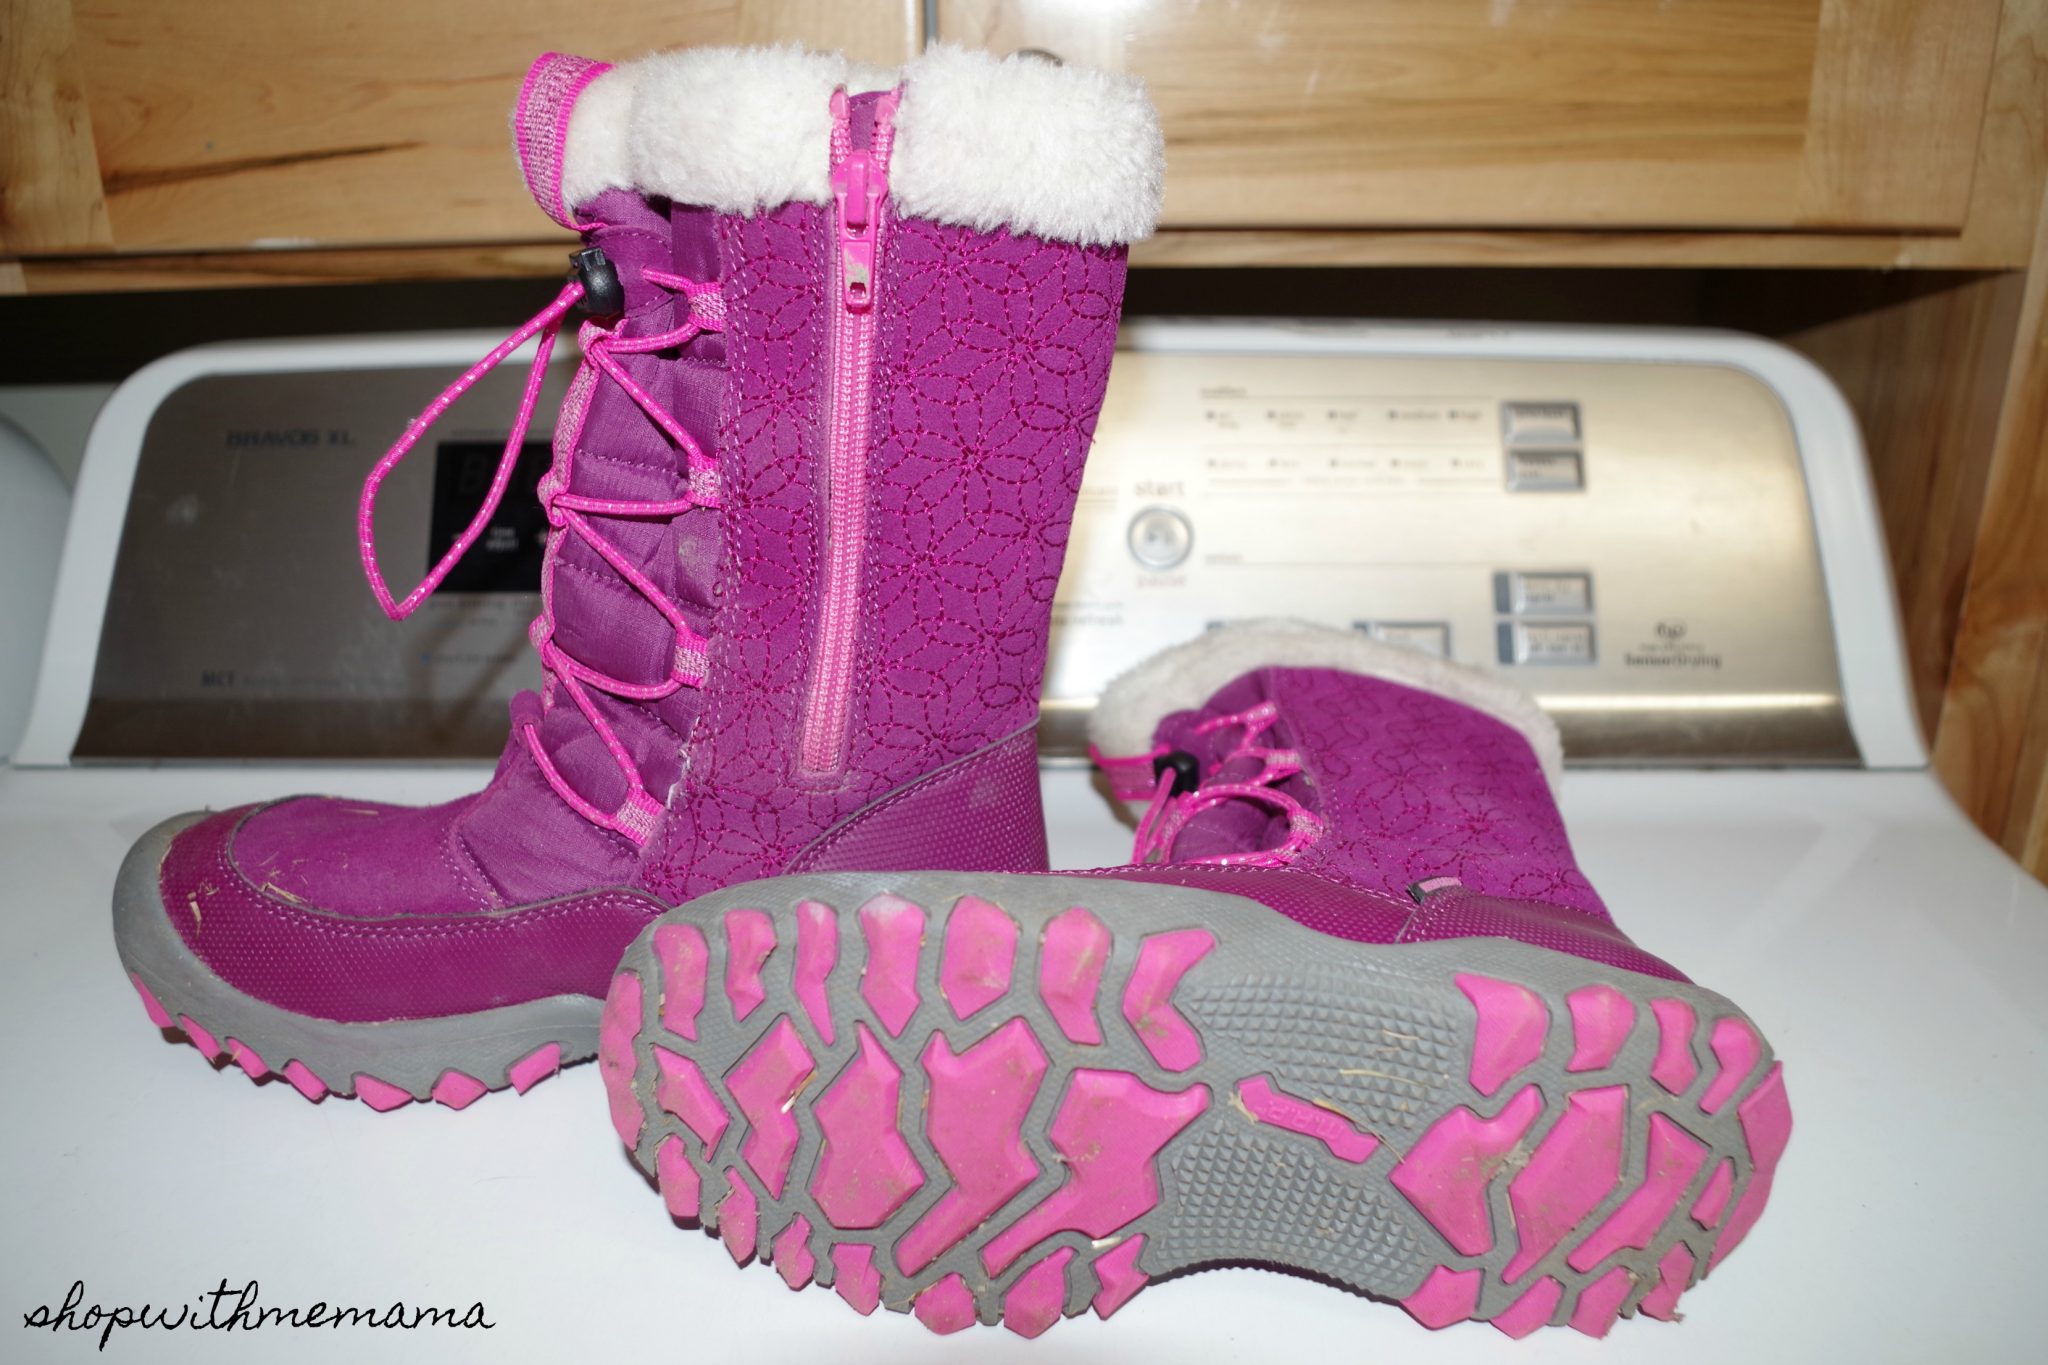 4 Winter Ready Boots For Kids